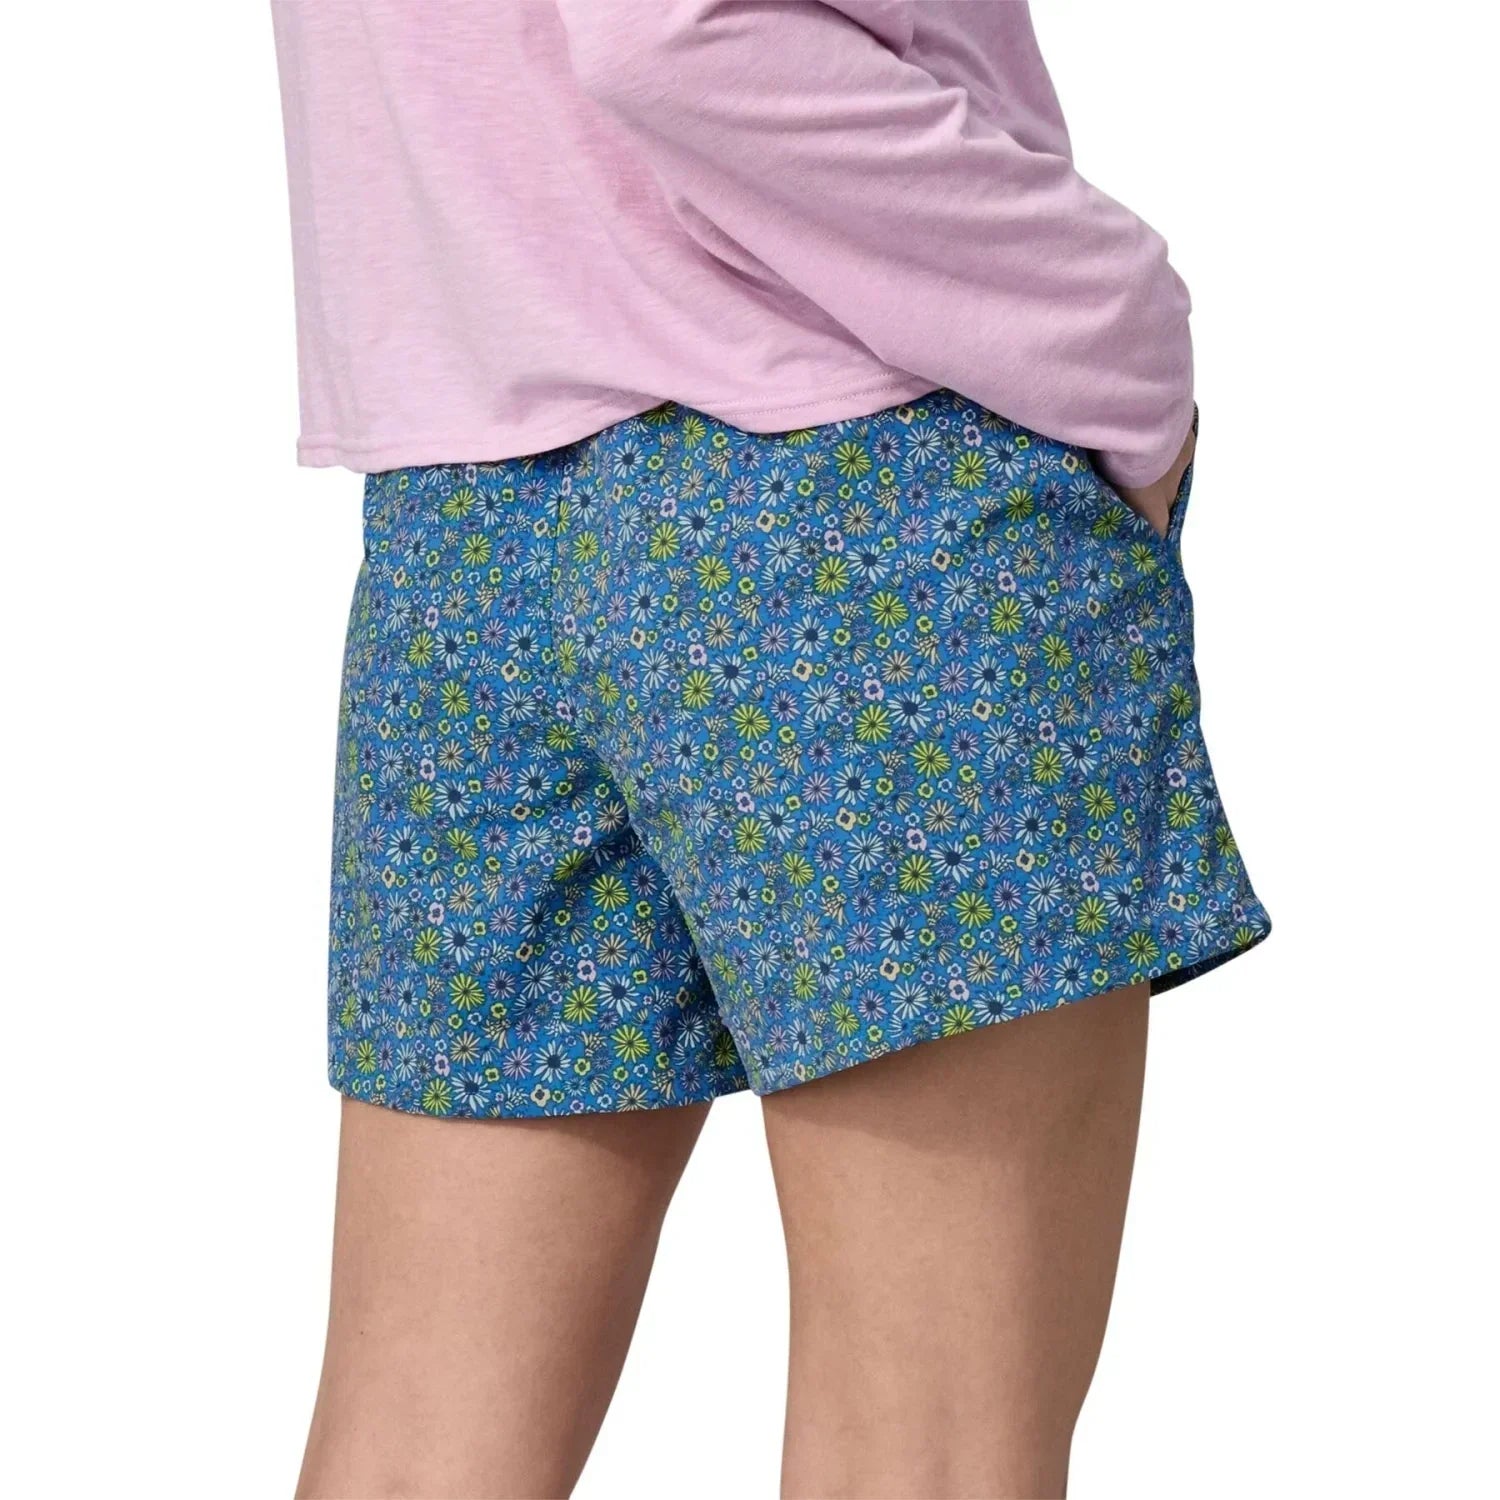 Patagonia 02. WOMENS APPAREL - WOMENS SHORTS - WOMENS SHORTS ACTIVE Women's Baggies Shorts - 5 in FLVE FLORAL FUN|VESSEL BLUE